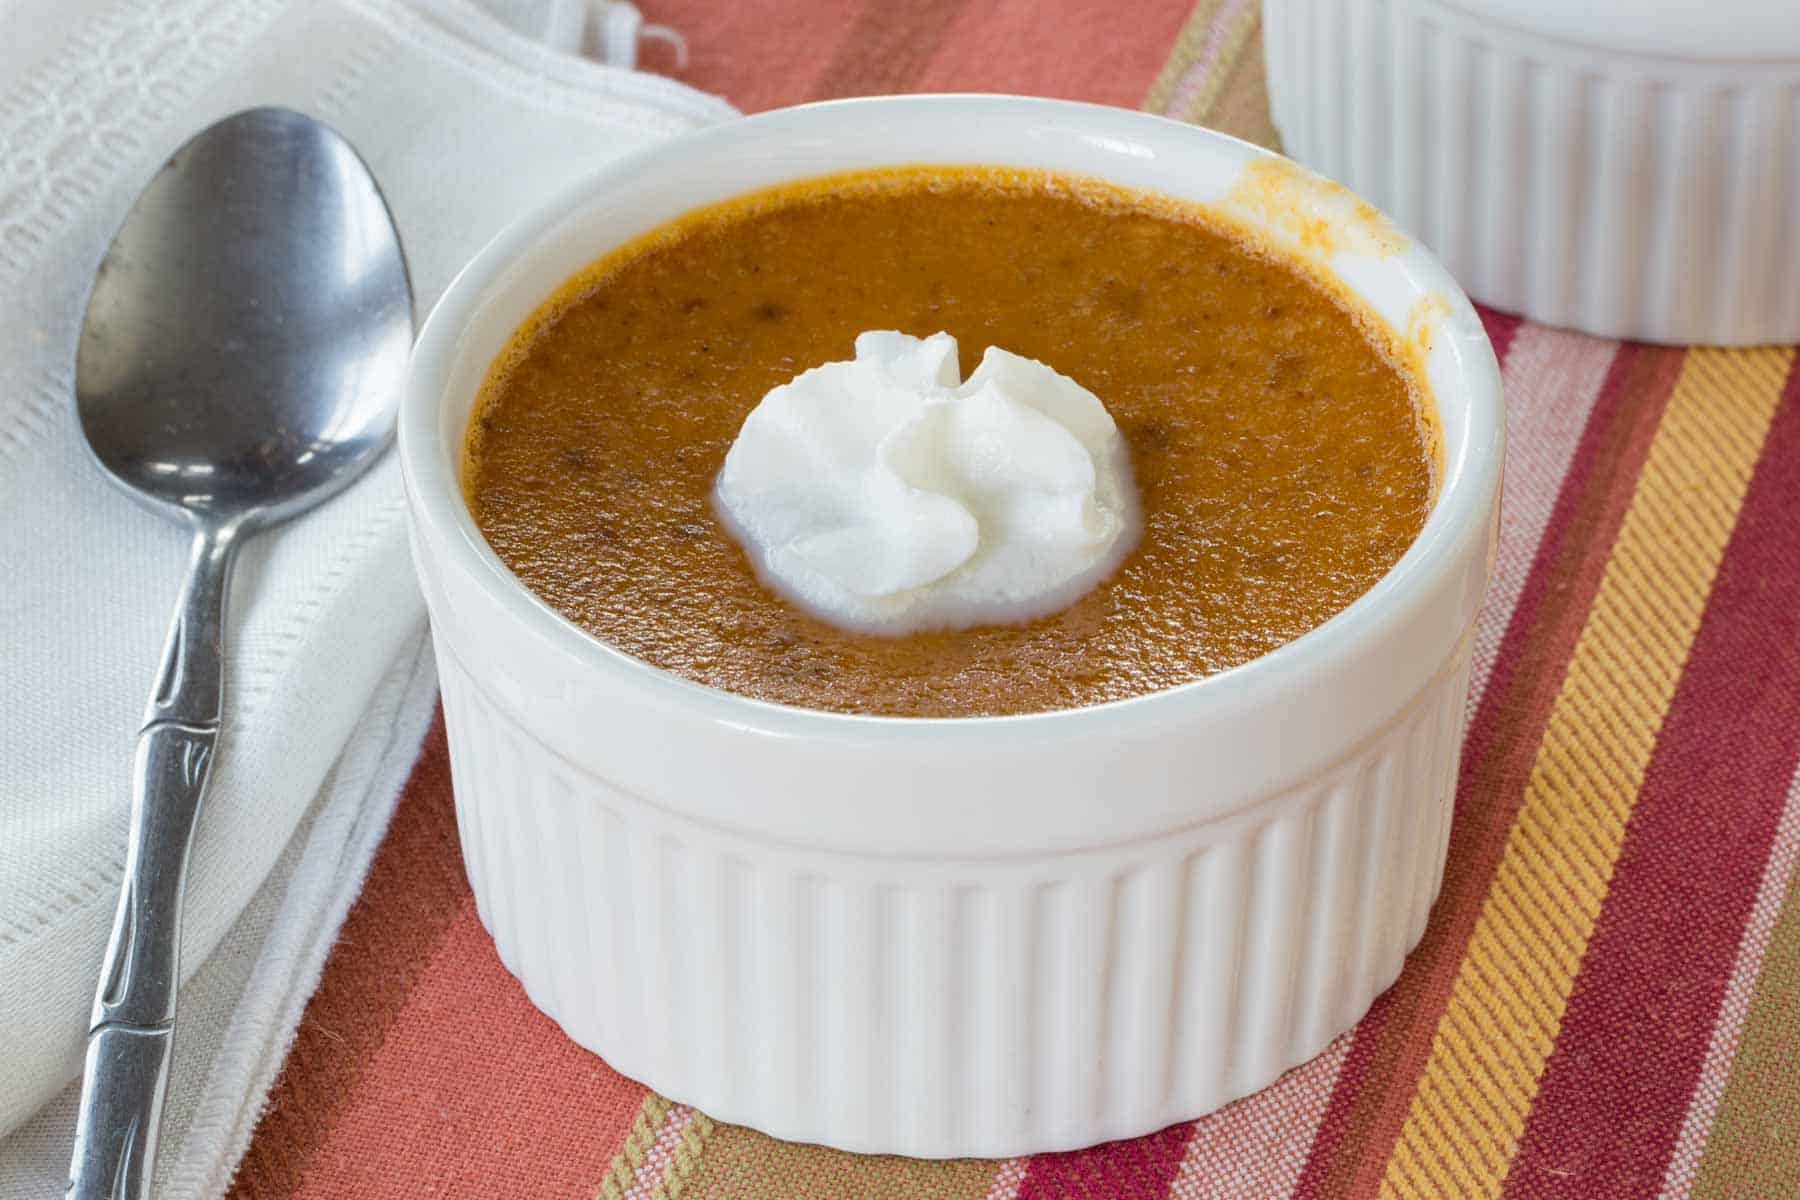 Pumpkin custard in a ramekin on a striped placemat with a cloth napkin and a small spoon next to it